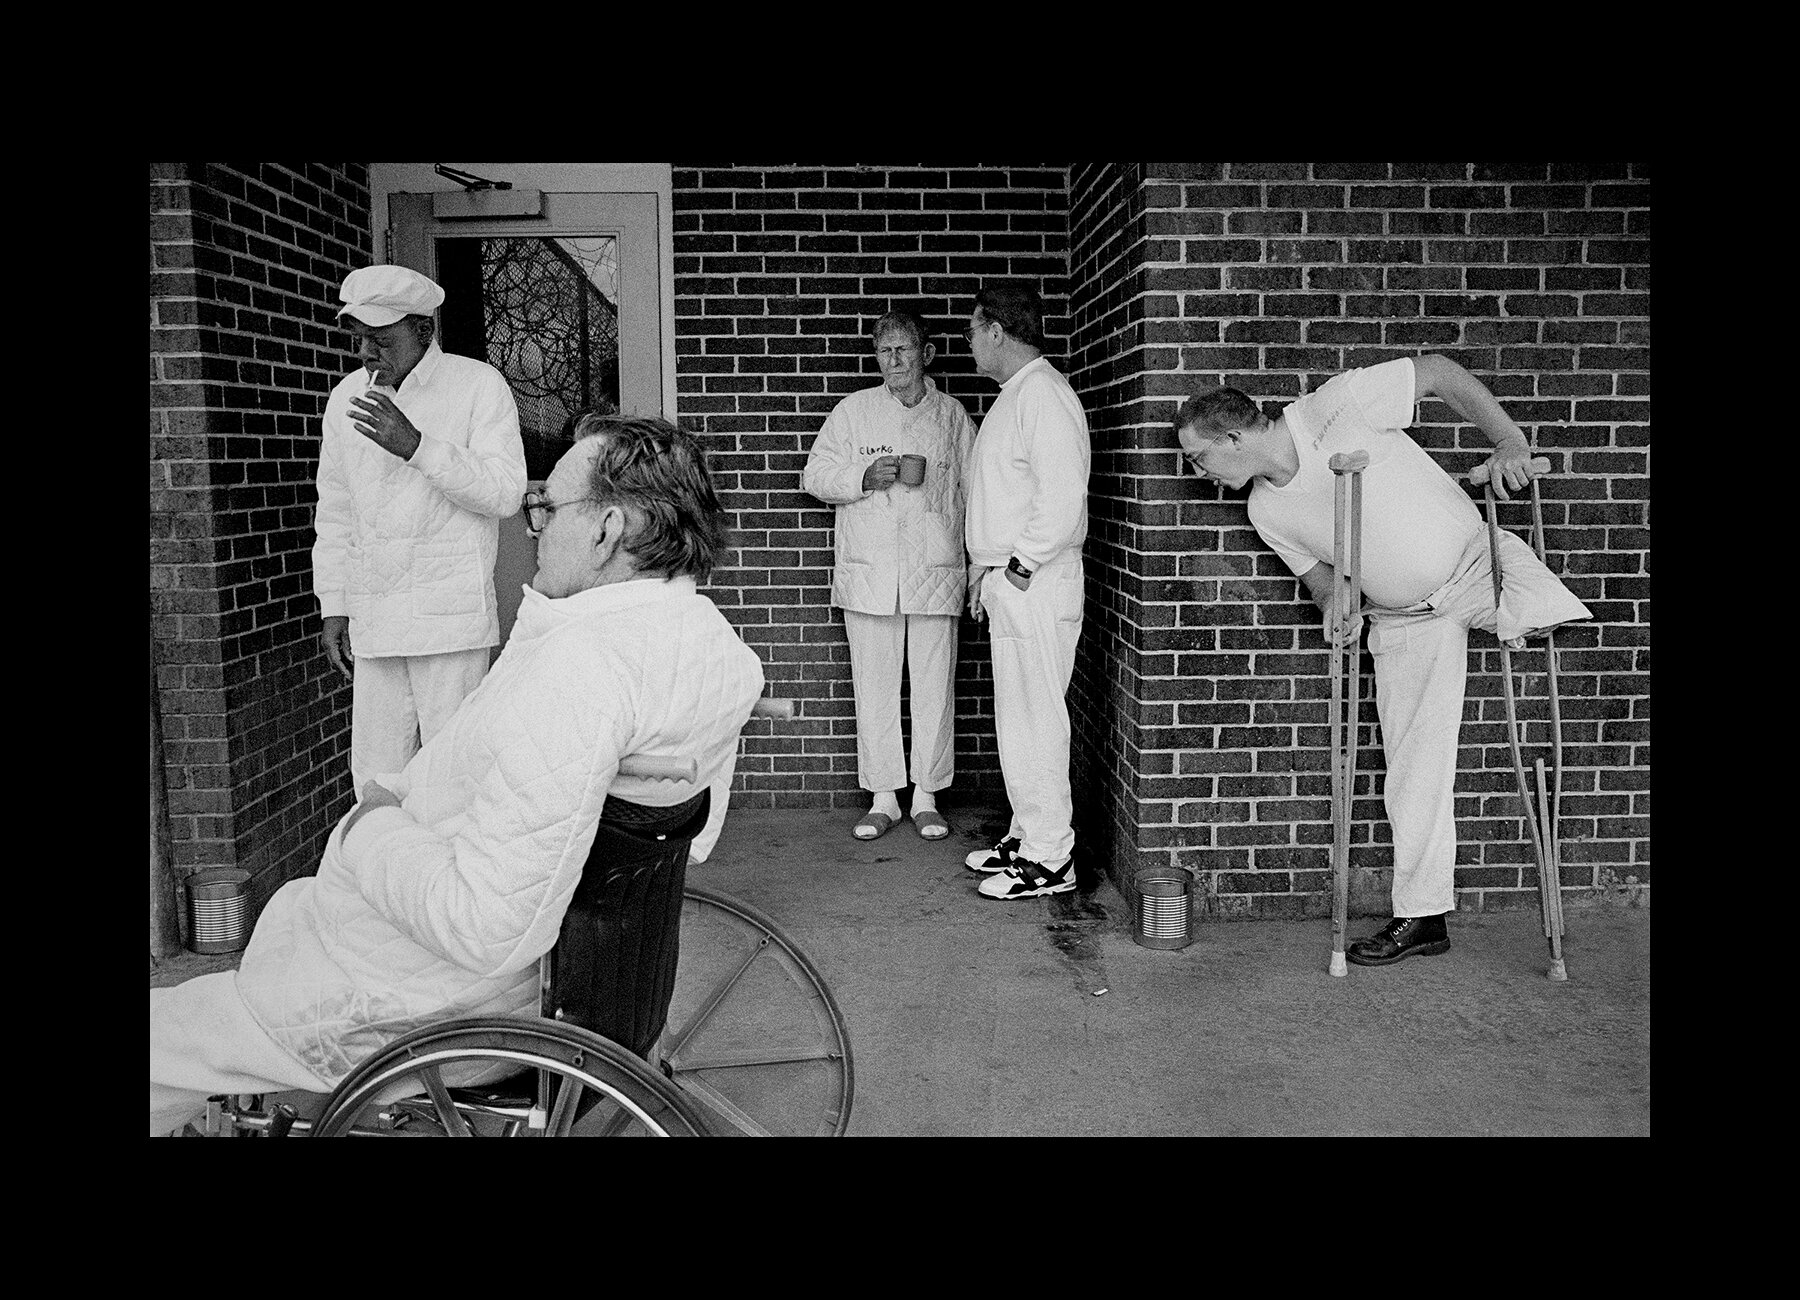  Inmates at the Hamilton Aged and Infirmed Facility gather to smoke in the designated outdoor area in Hamilton, Alabama. 1997 